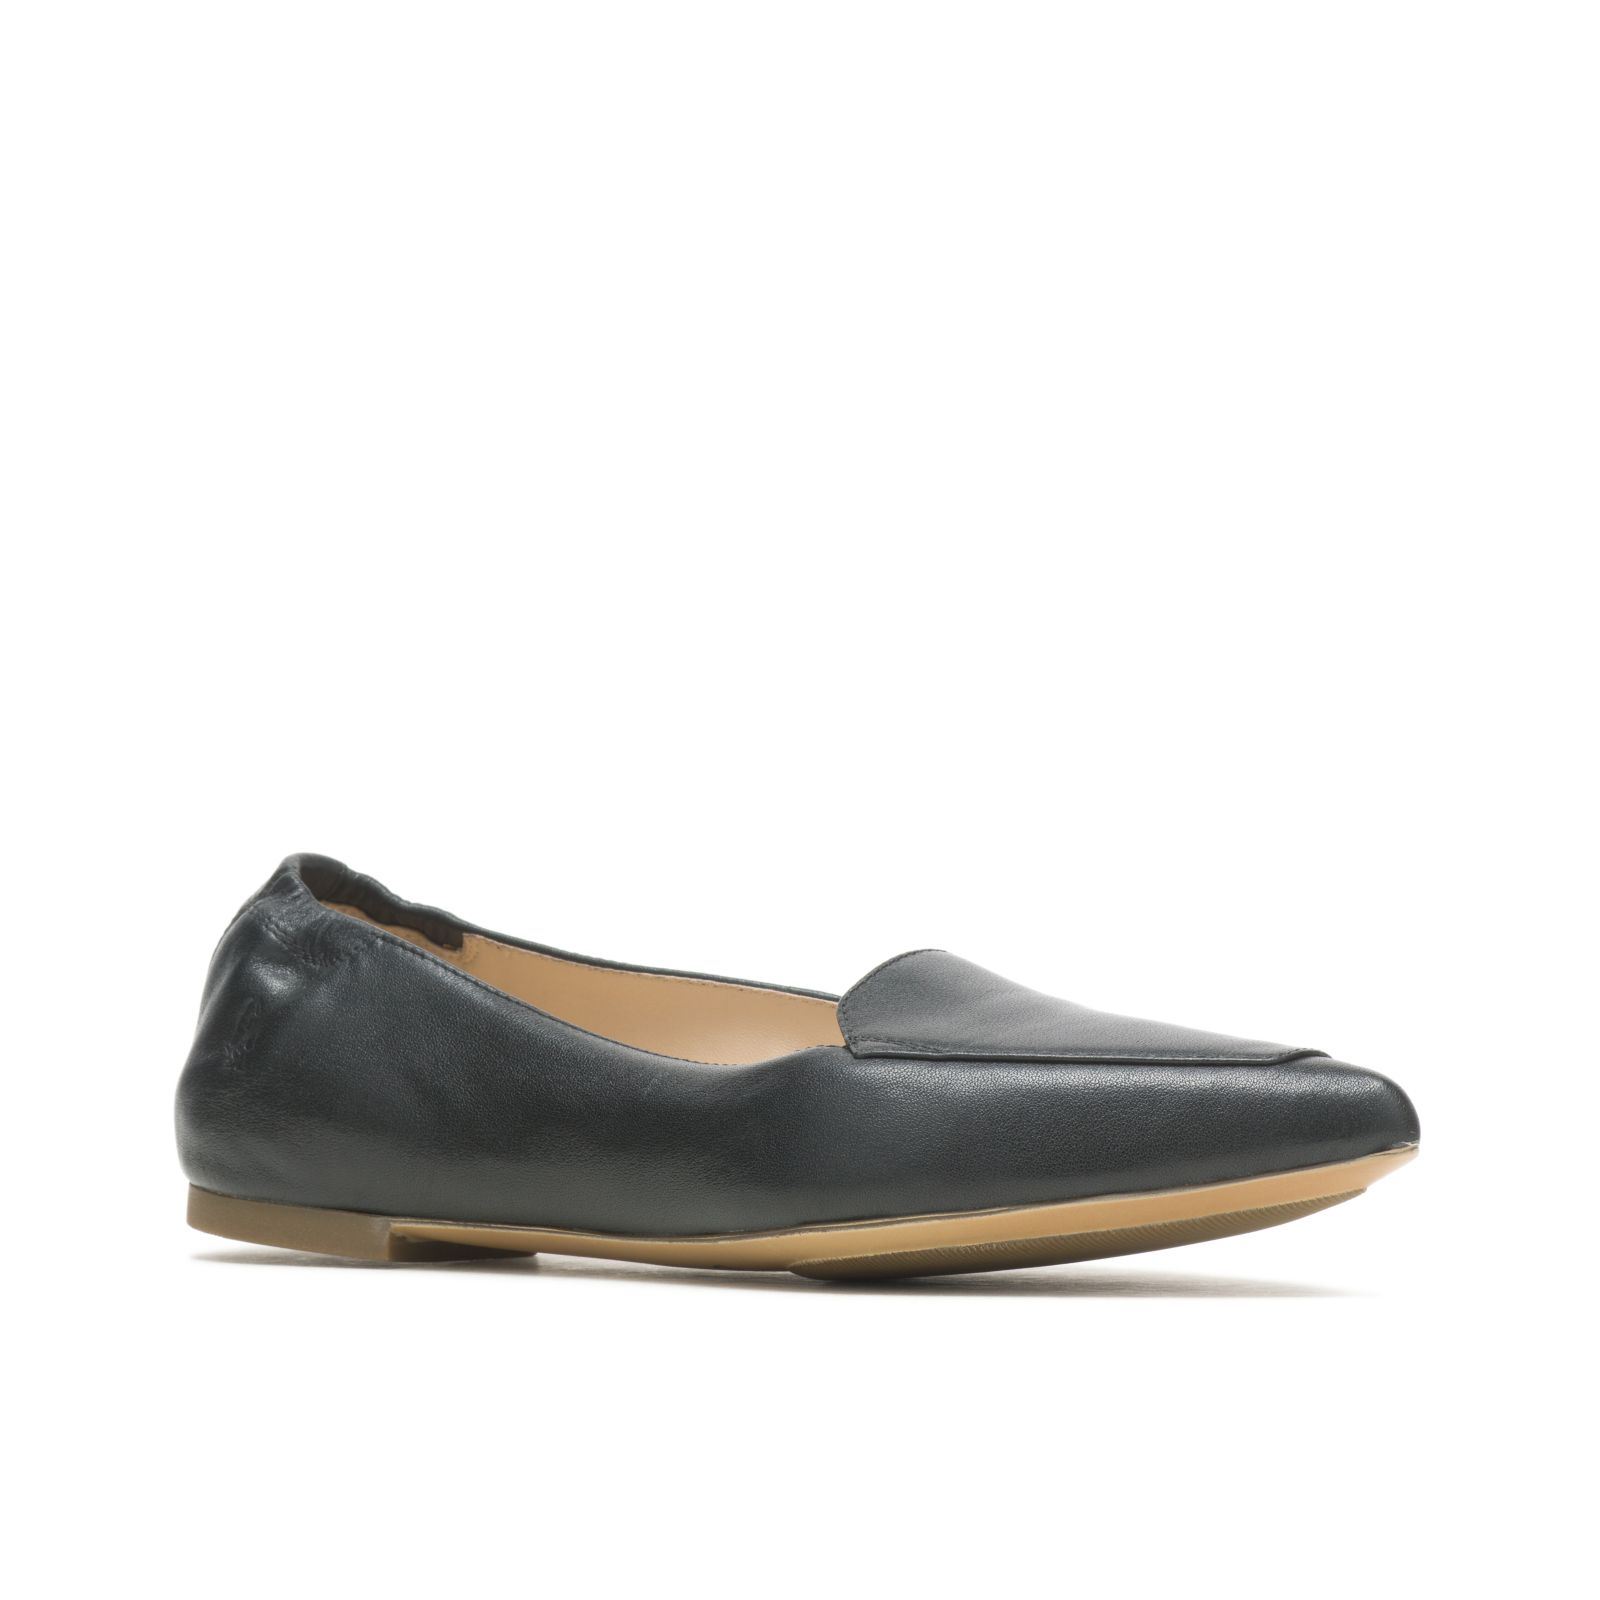 Loafers Hush Puppies Hazel Pointe Mujer Negros | EOFMXWQ-74